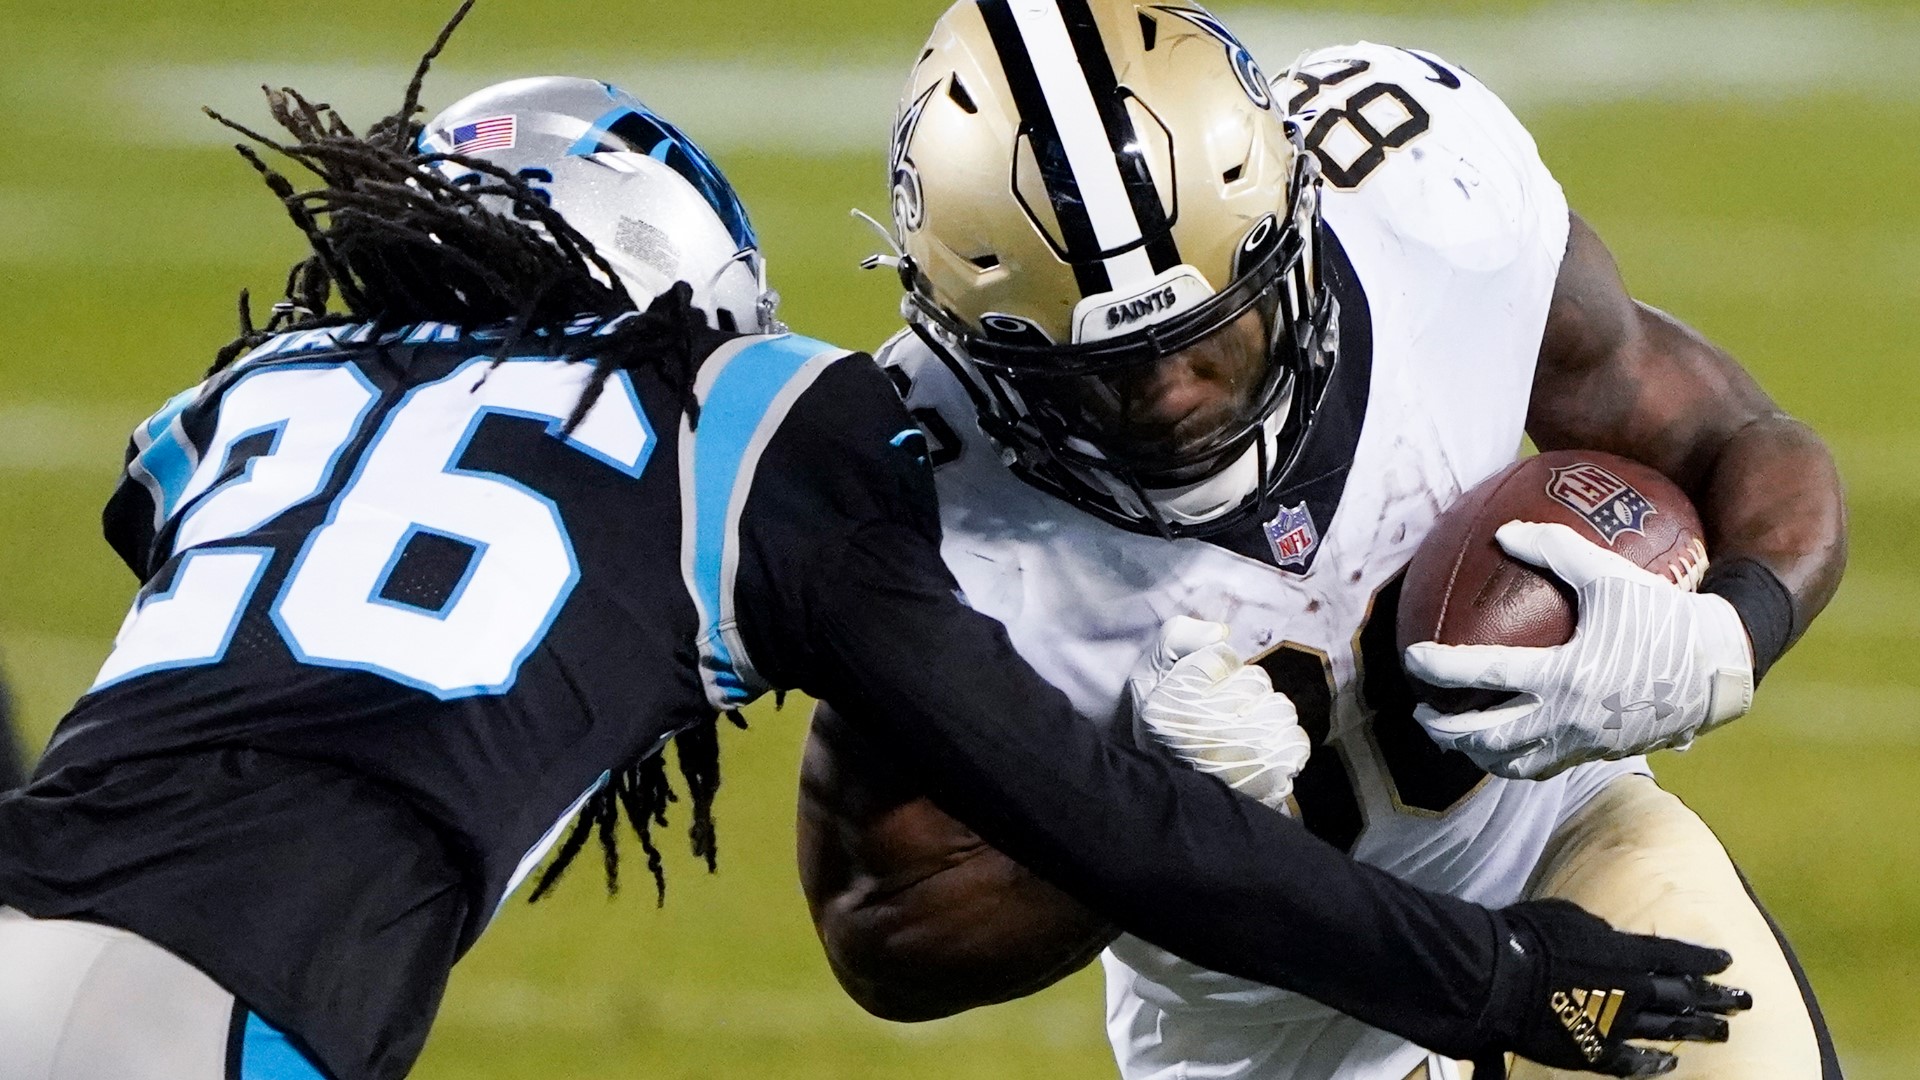 The Carolina Panthers season ended Sunday afternoon in Uptown, ending on a loss against one of the Panthers' biggest rivals, the New Orleans Saints.